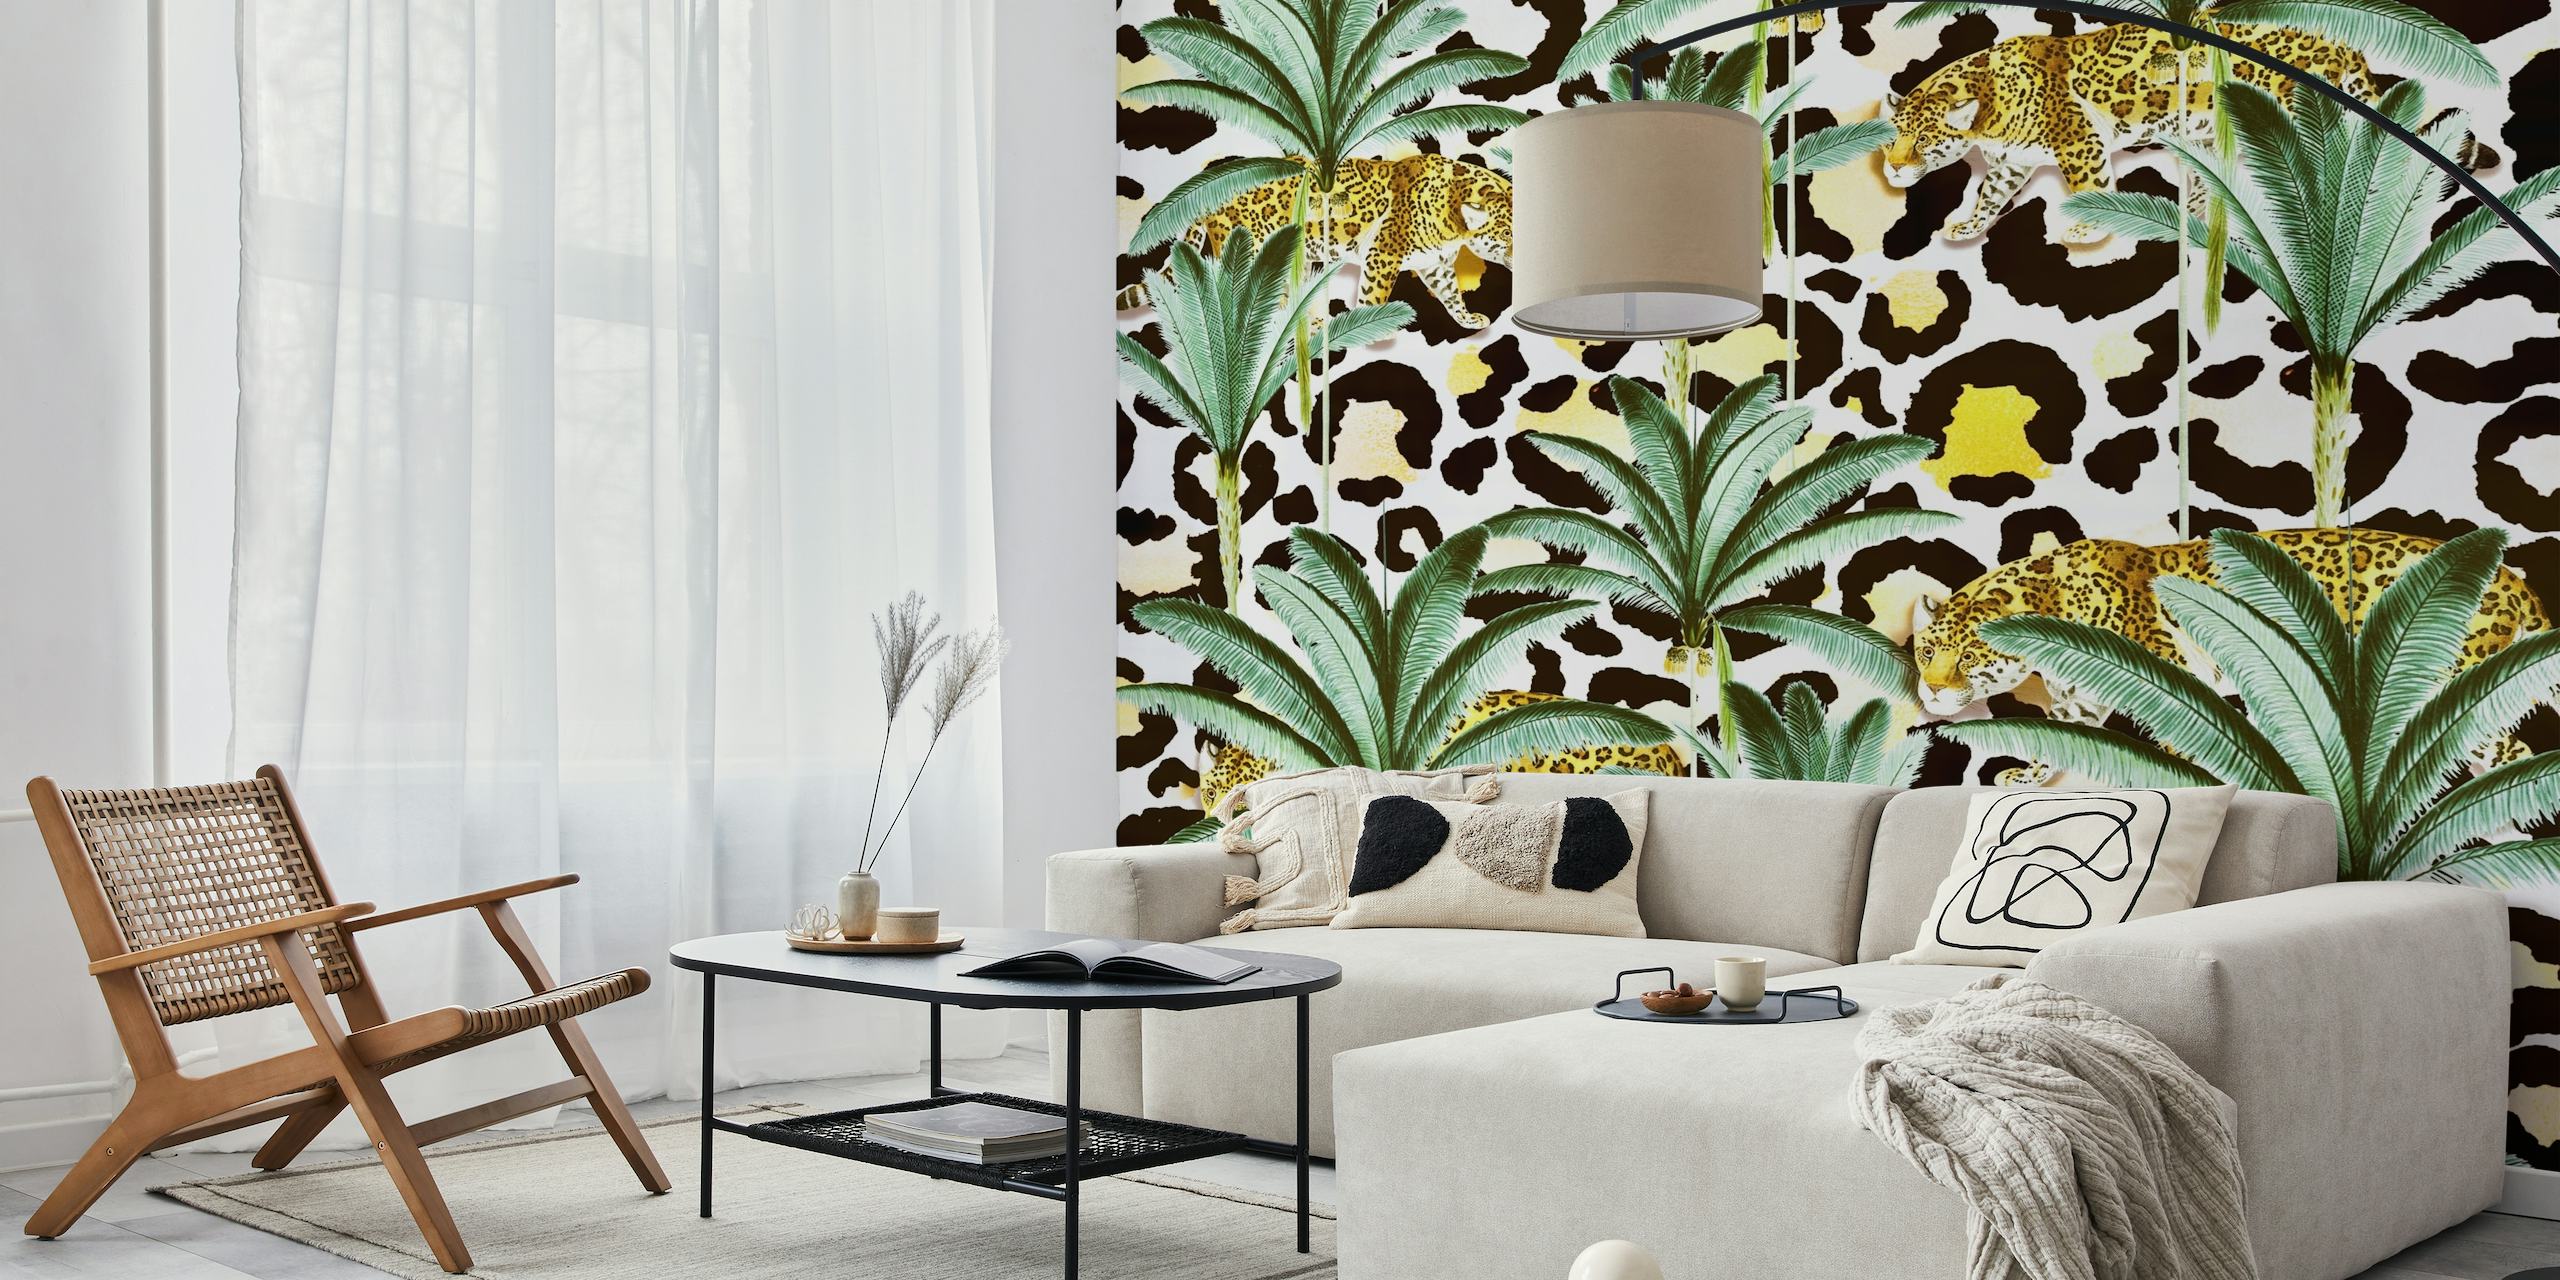 Jungle Prowl wall mural with leopard print and palm leaves